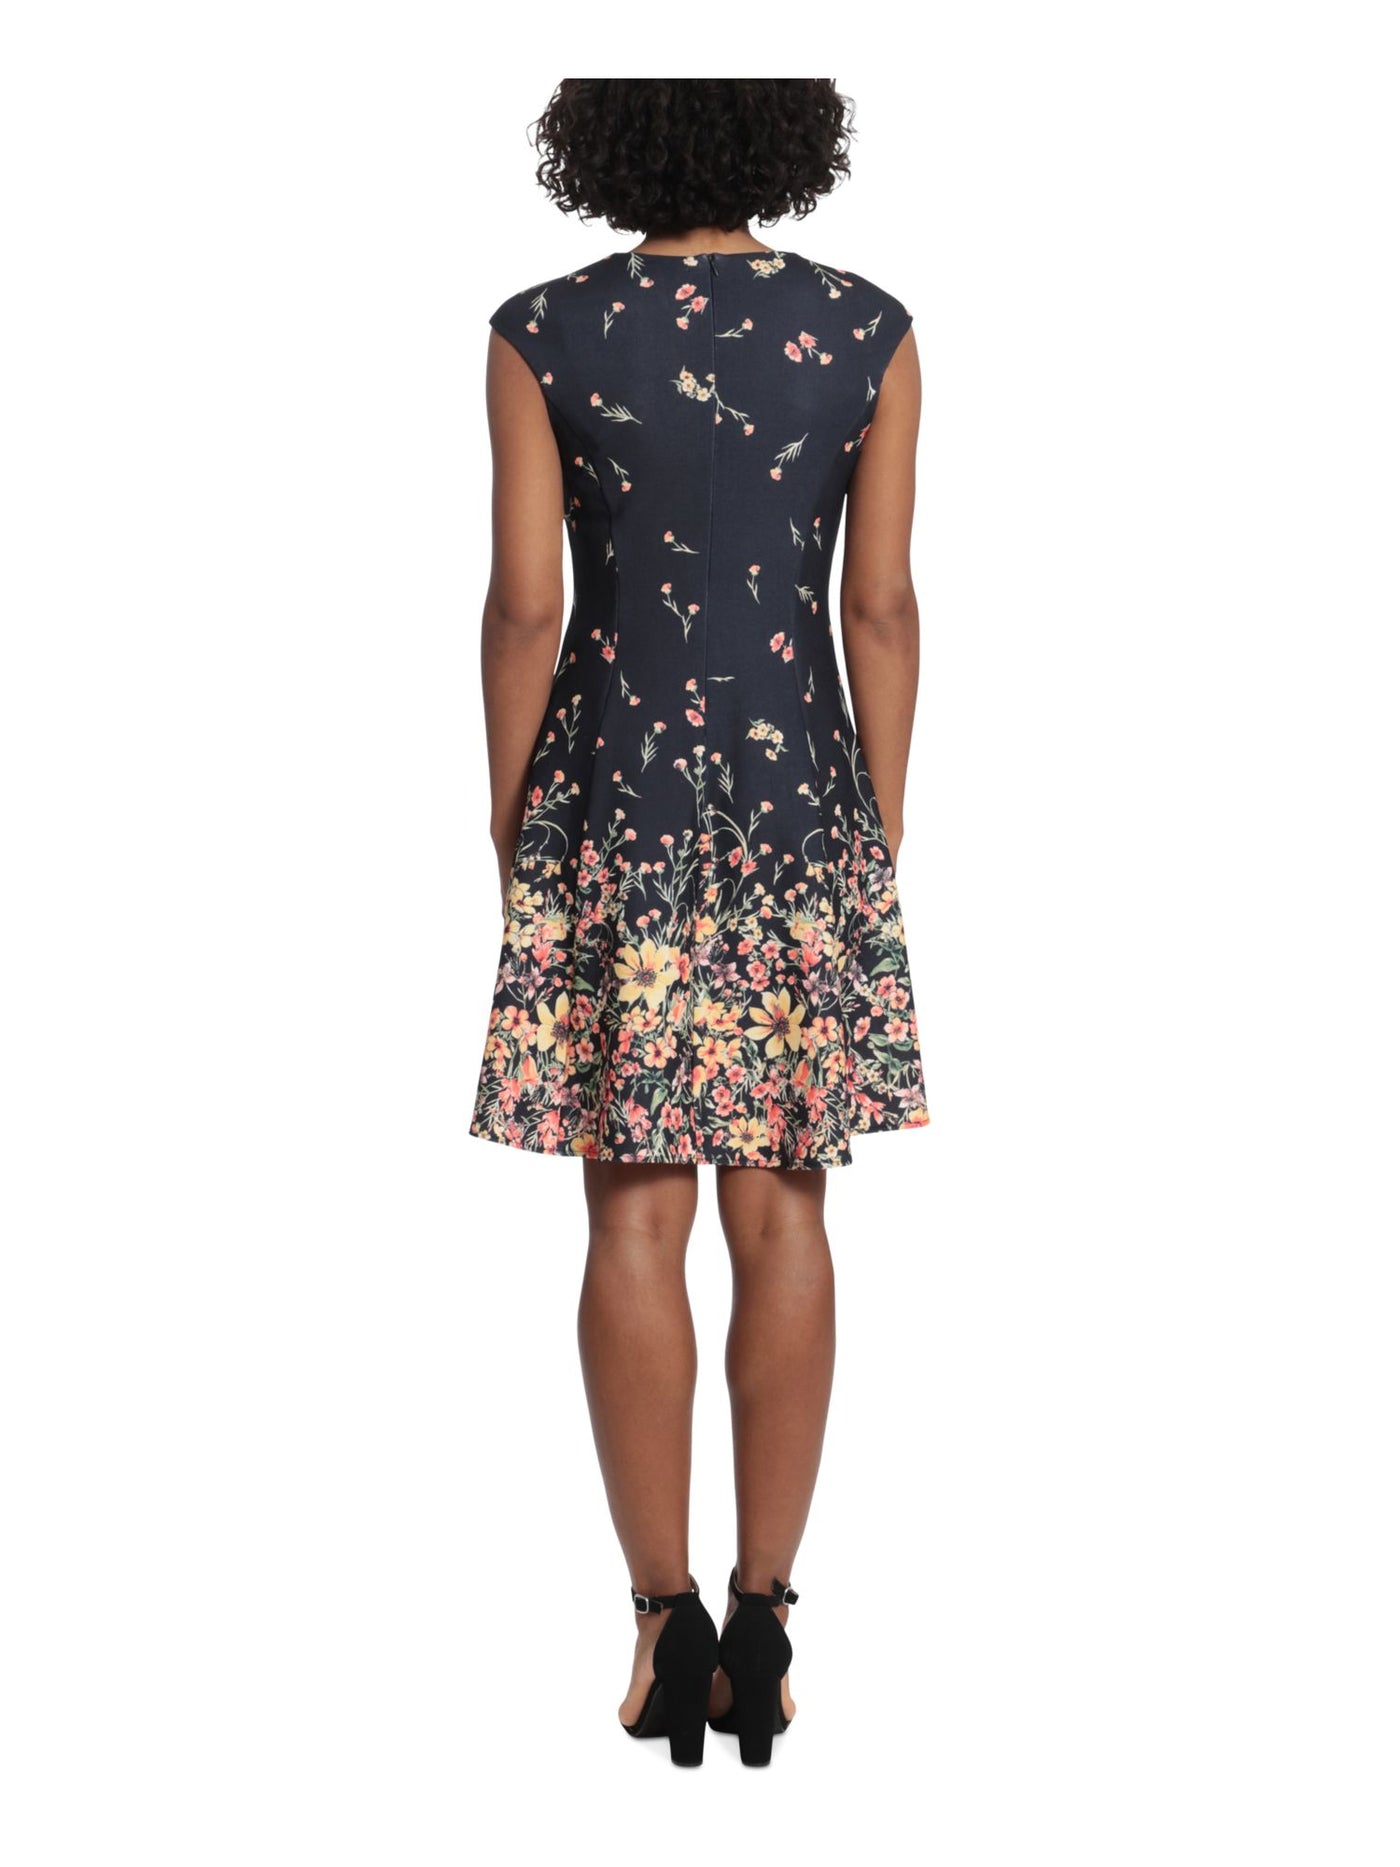 LONDON TIMES PETITES Womens Black Zippered Floral Cap Sleeve Round Neck Above The Knee Fit + Flare Dress Petites 8P